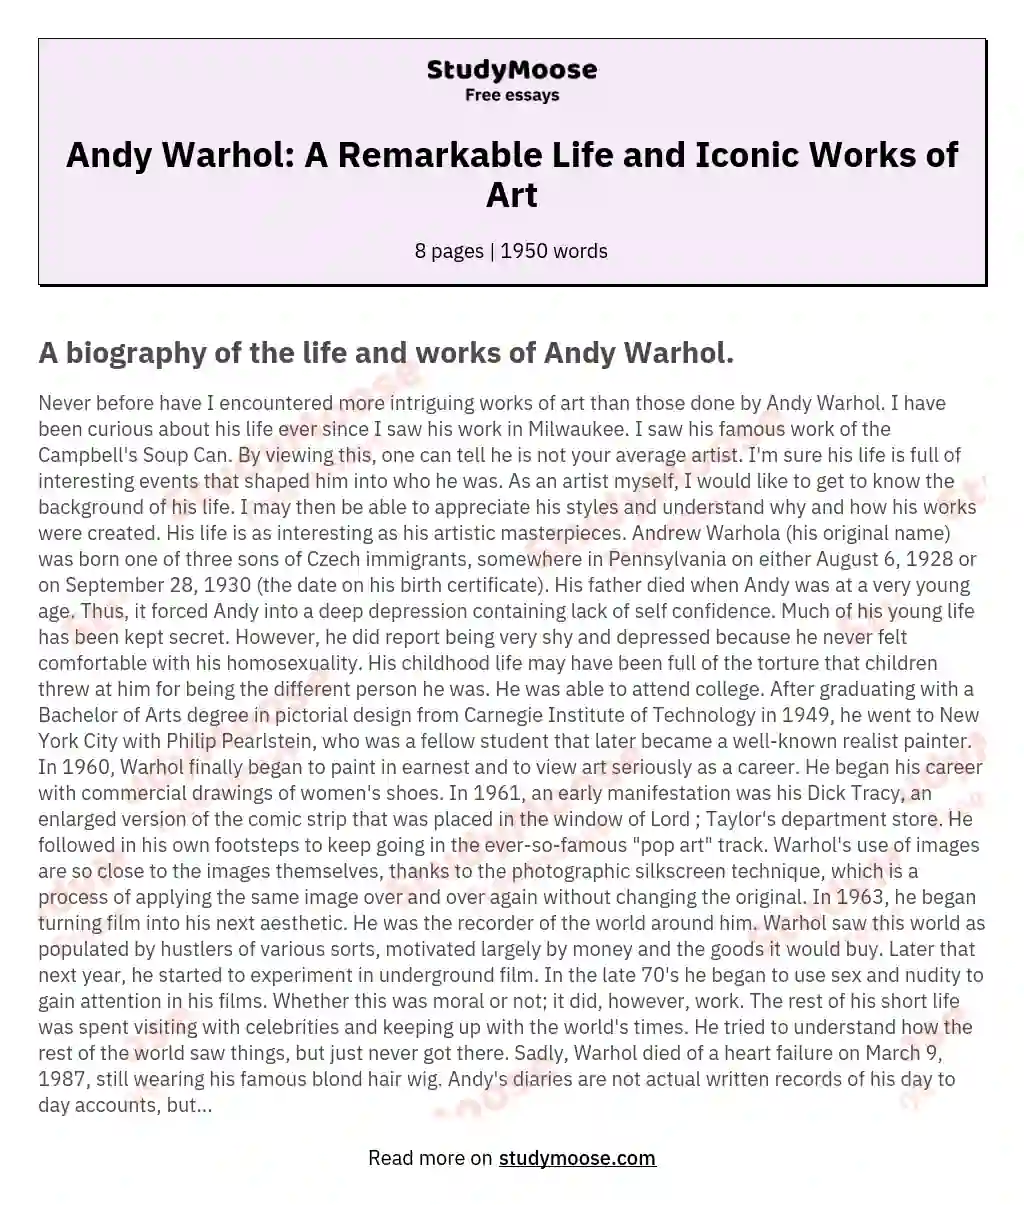 The Life and Works of Andy Warhol: A Biography essay